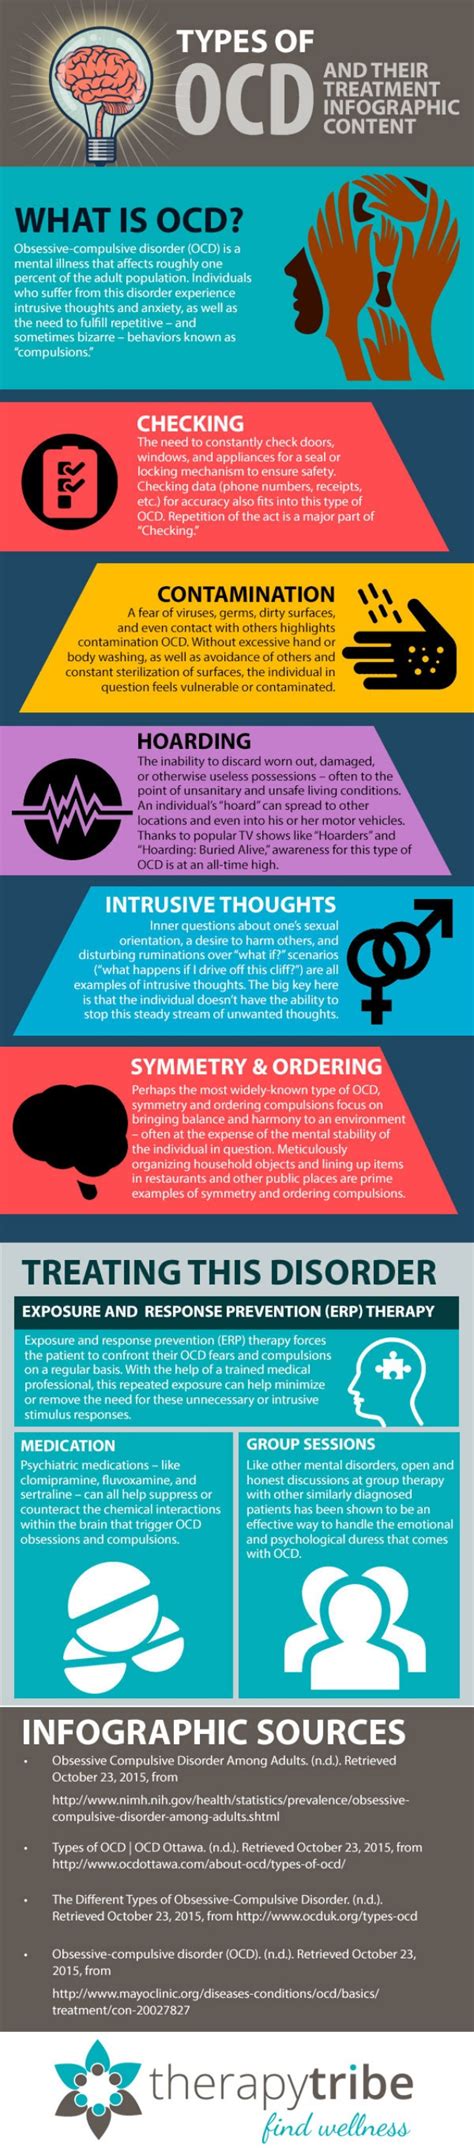 Obsessive compulsive disorder (ocd) is an anxiety disorder that causes a person to suffer repeated obsessions and compulsions. Types of OCD (Obsessive Compulsive Disorder)